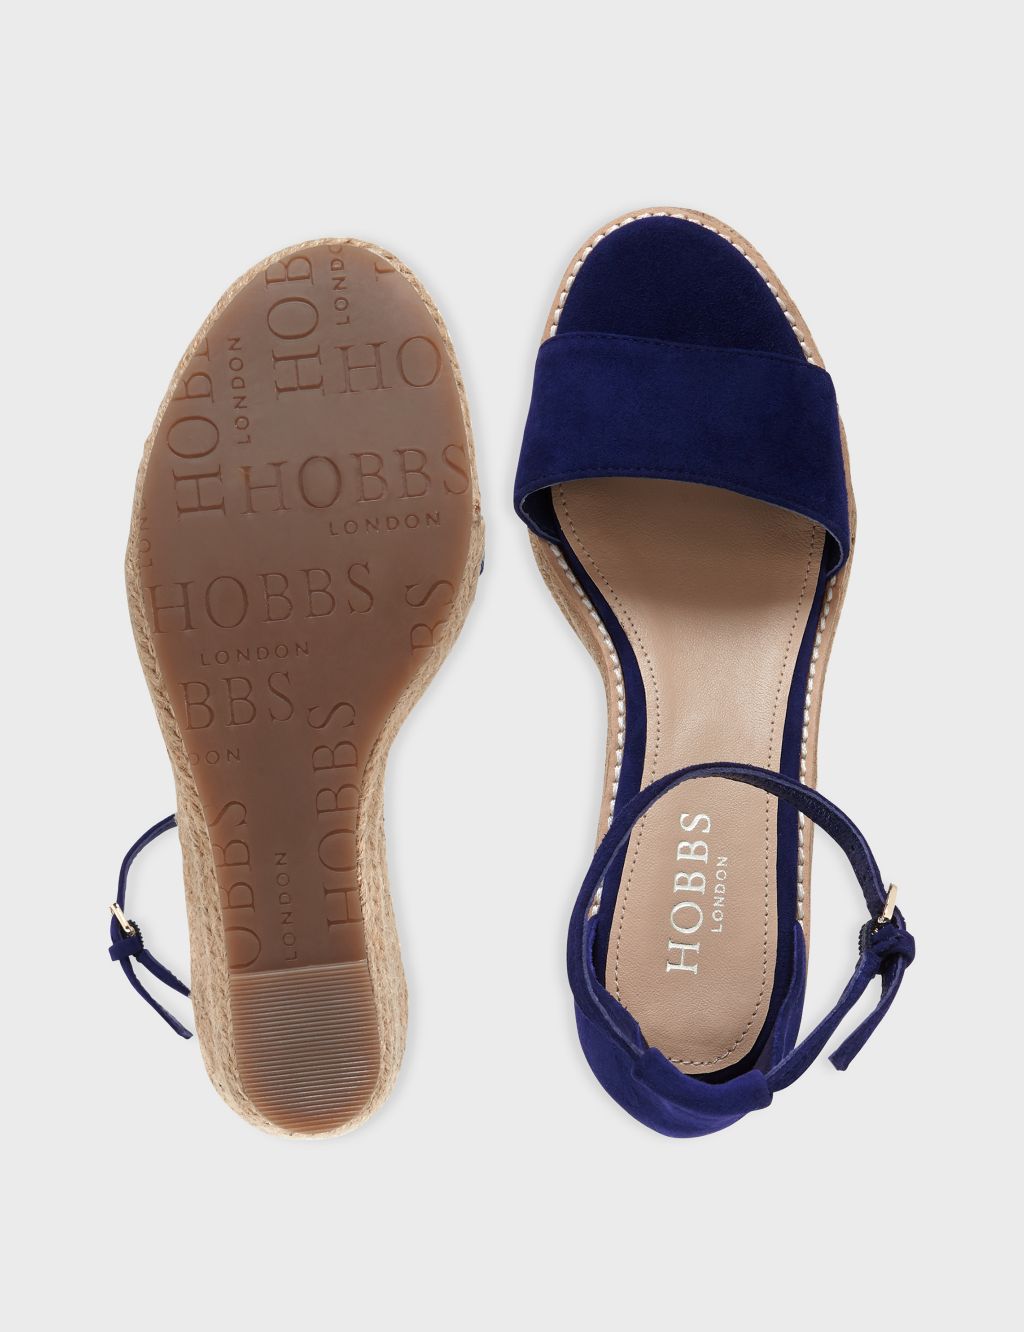 Suede Ankle Strap Wedge Espadrilles image 3